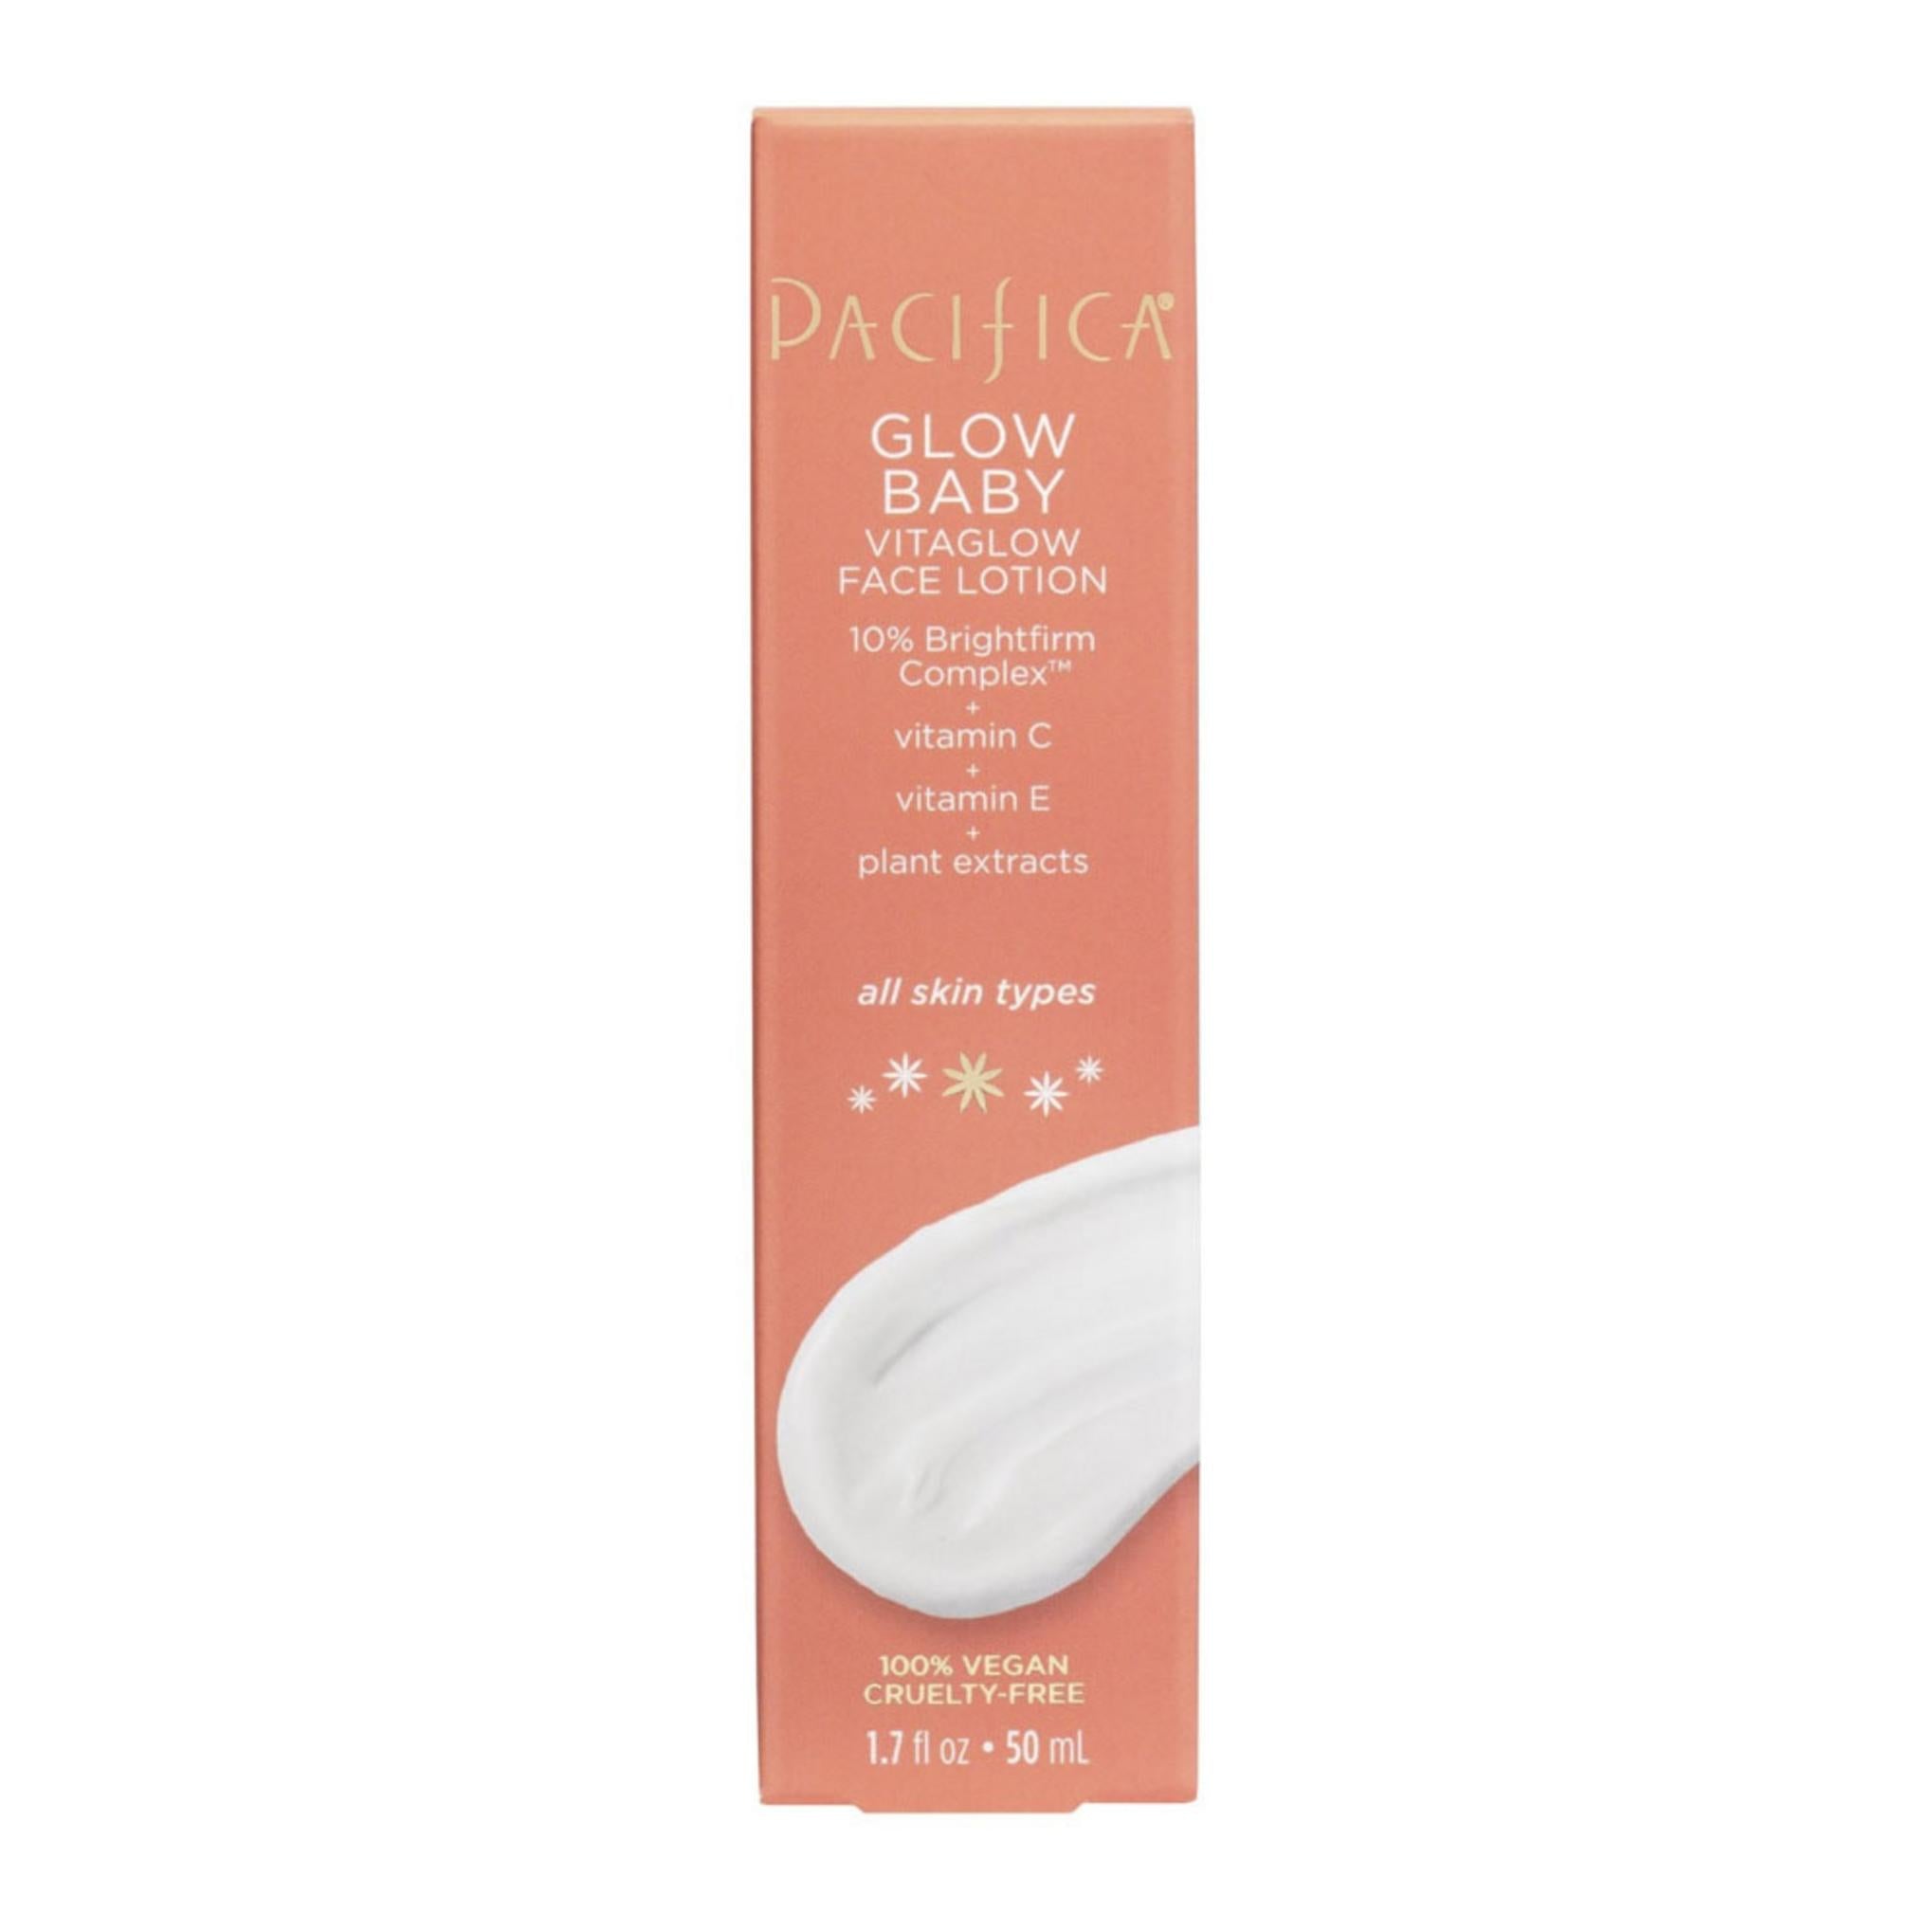 Pacifica Glow Baby Vitaglow Face Lotion